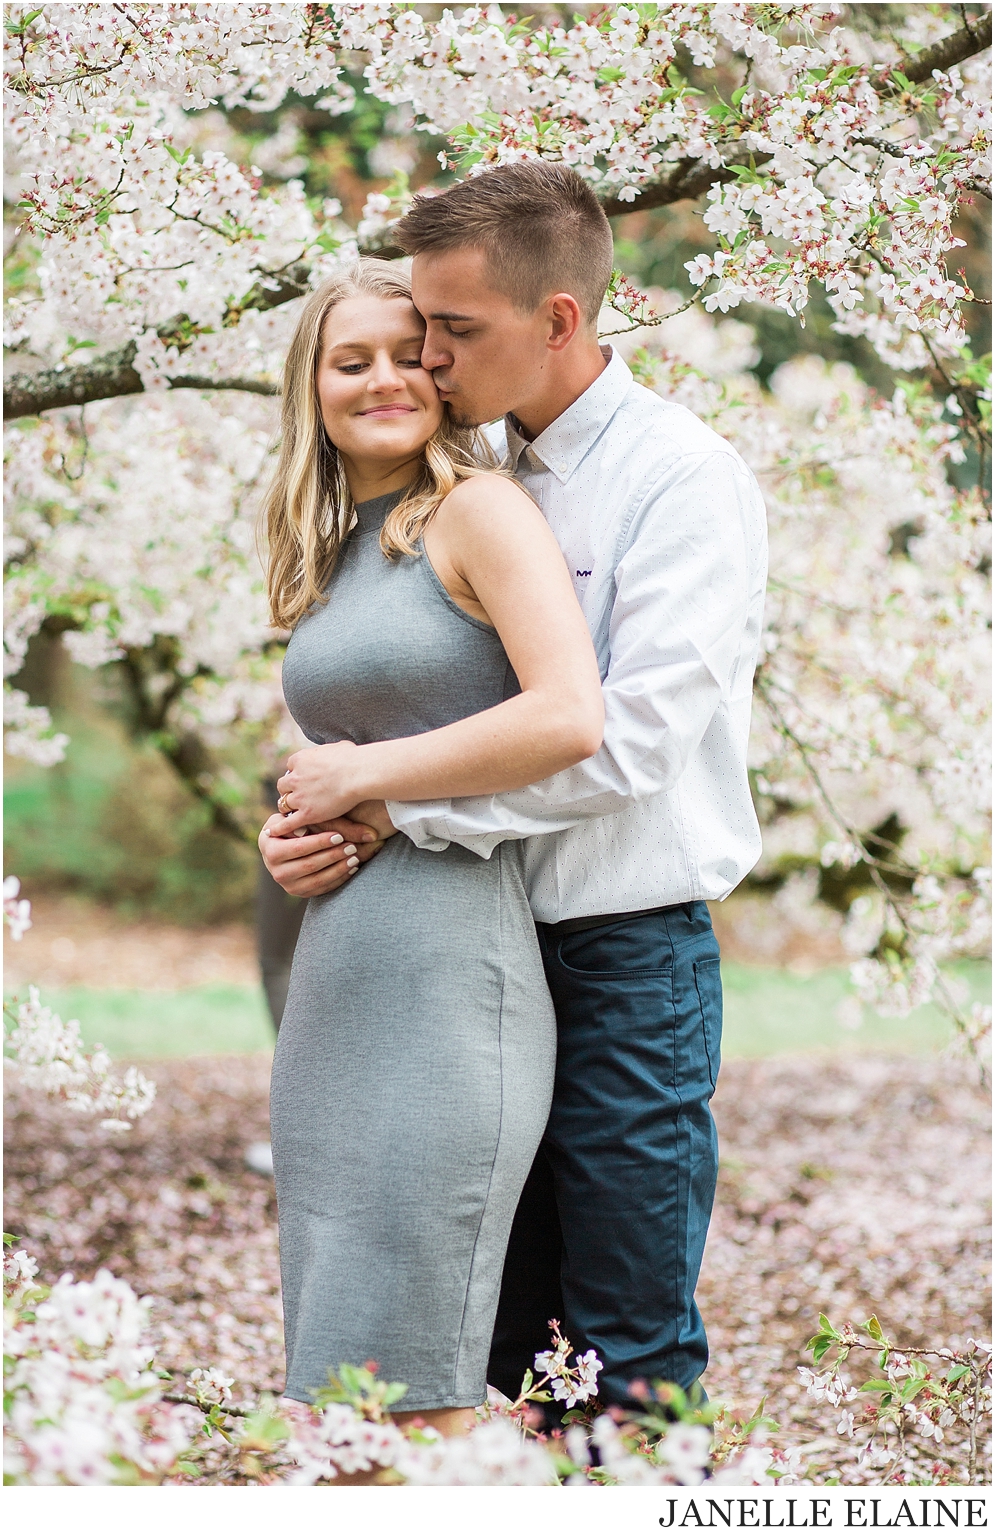 tricia and nate engagement photos-janelle elaine photography-127.jpg